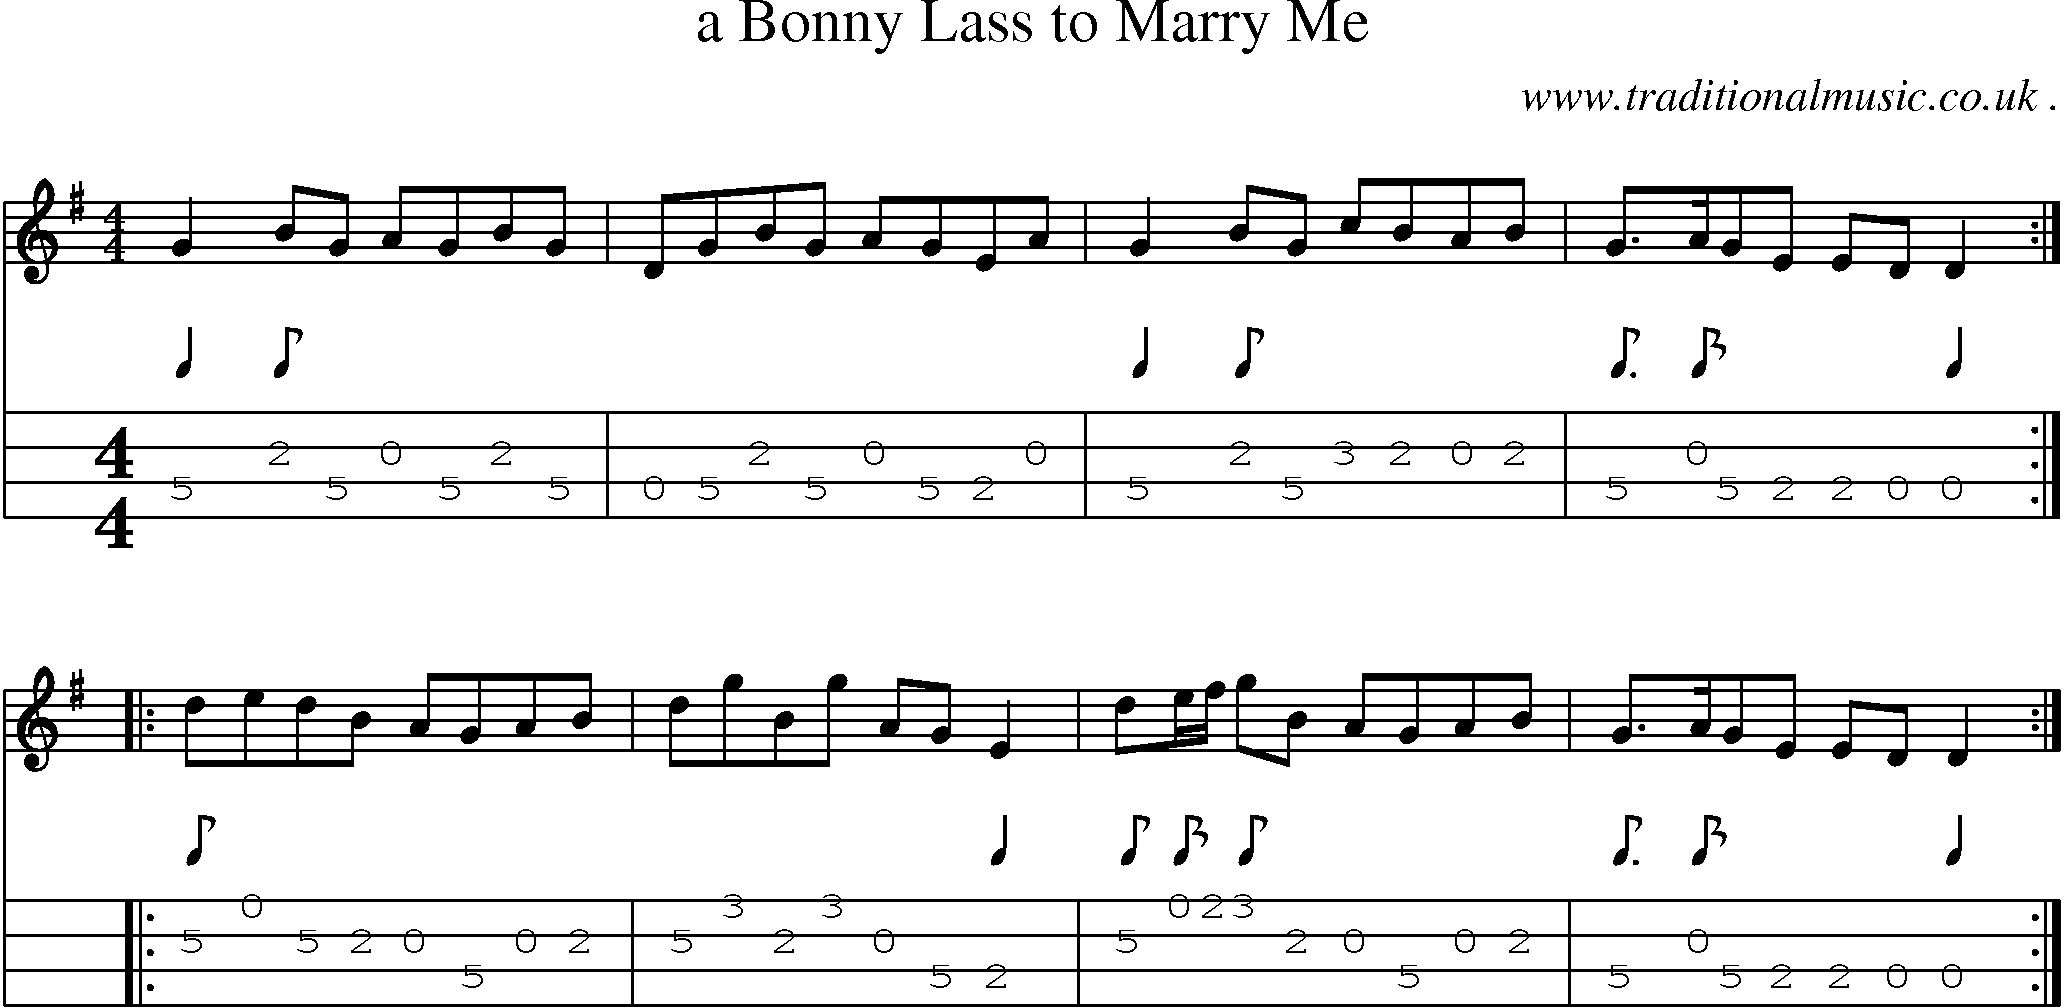 Sheet-music  score, Chords and Mandolin Tabs for A Bonny Lass To Marry Me